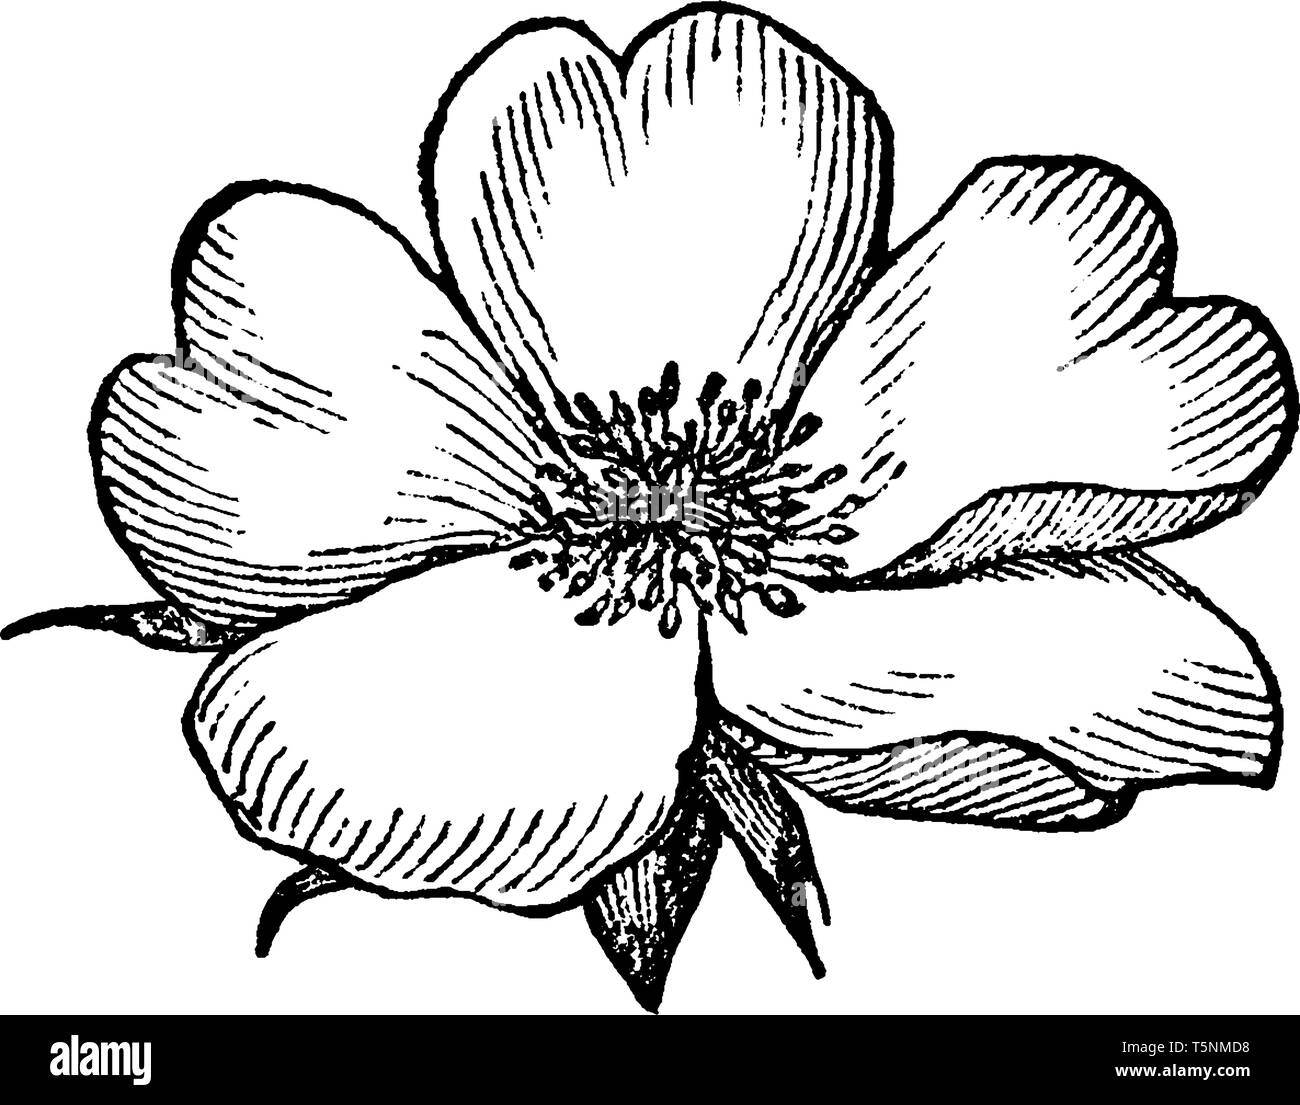 An image of a Rosaceous Corolla flower which is the inner circle of the parts of the flowers, composed of petals, vintage line drawing or engraving il Stock Vector